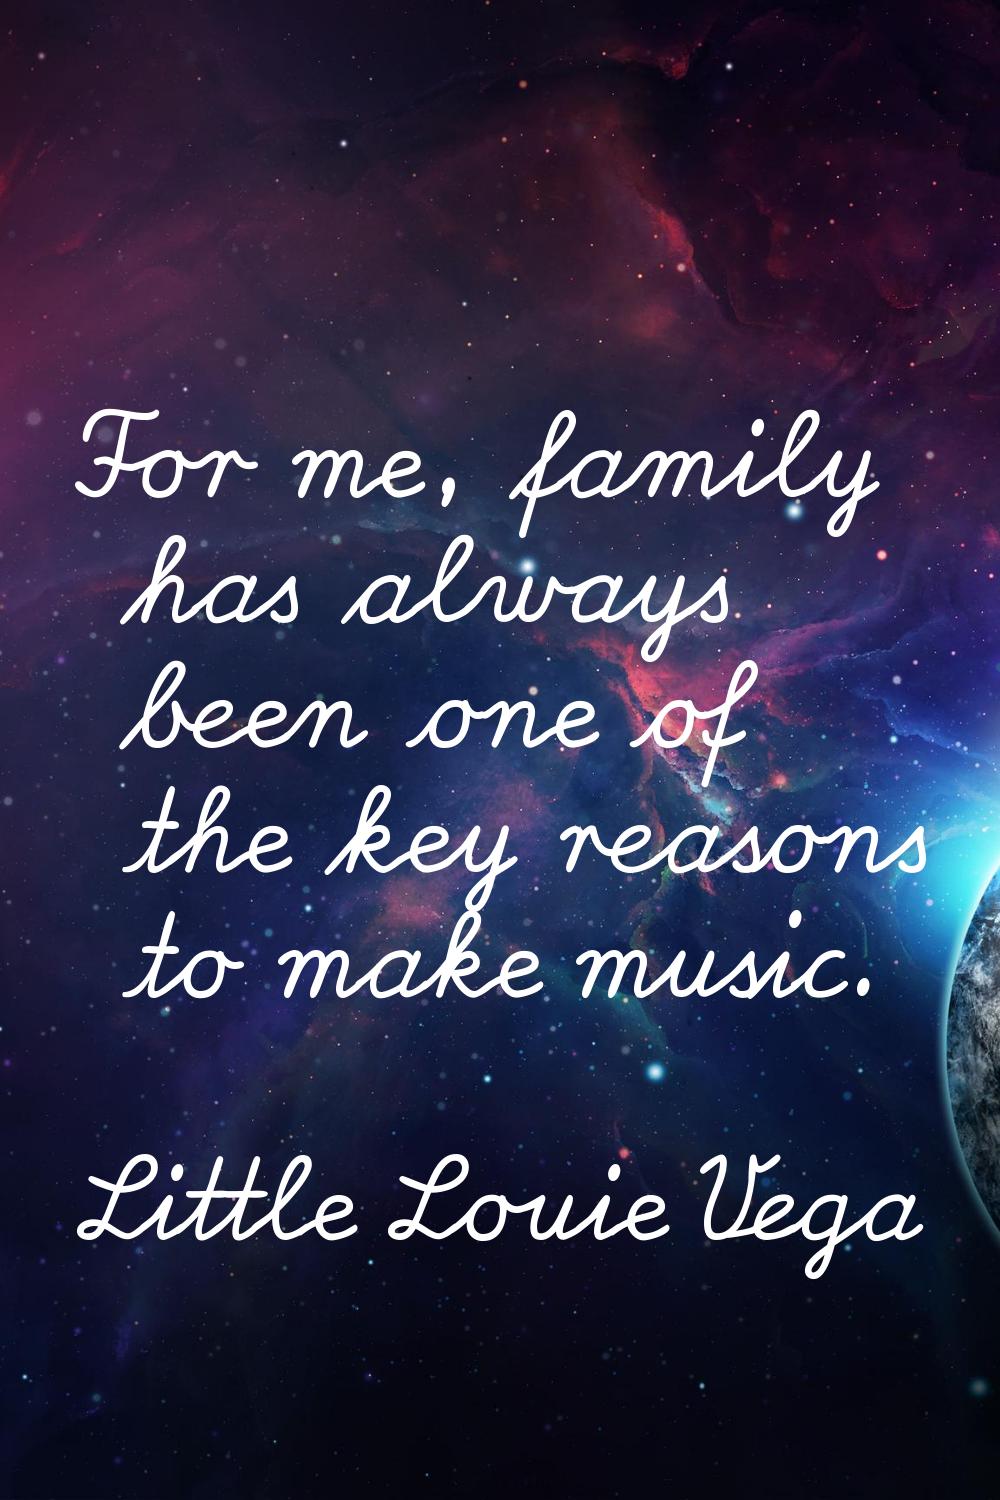 For me, family has always been one of the key reasons to make music.